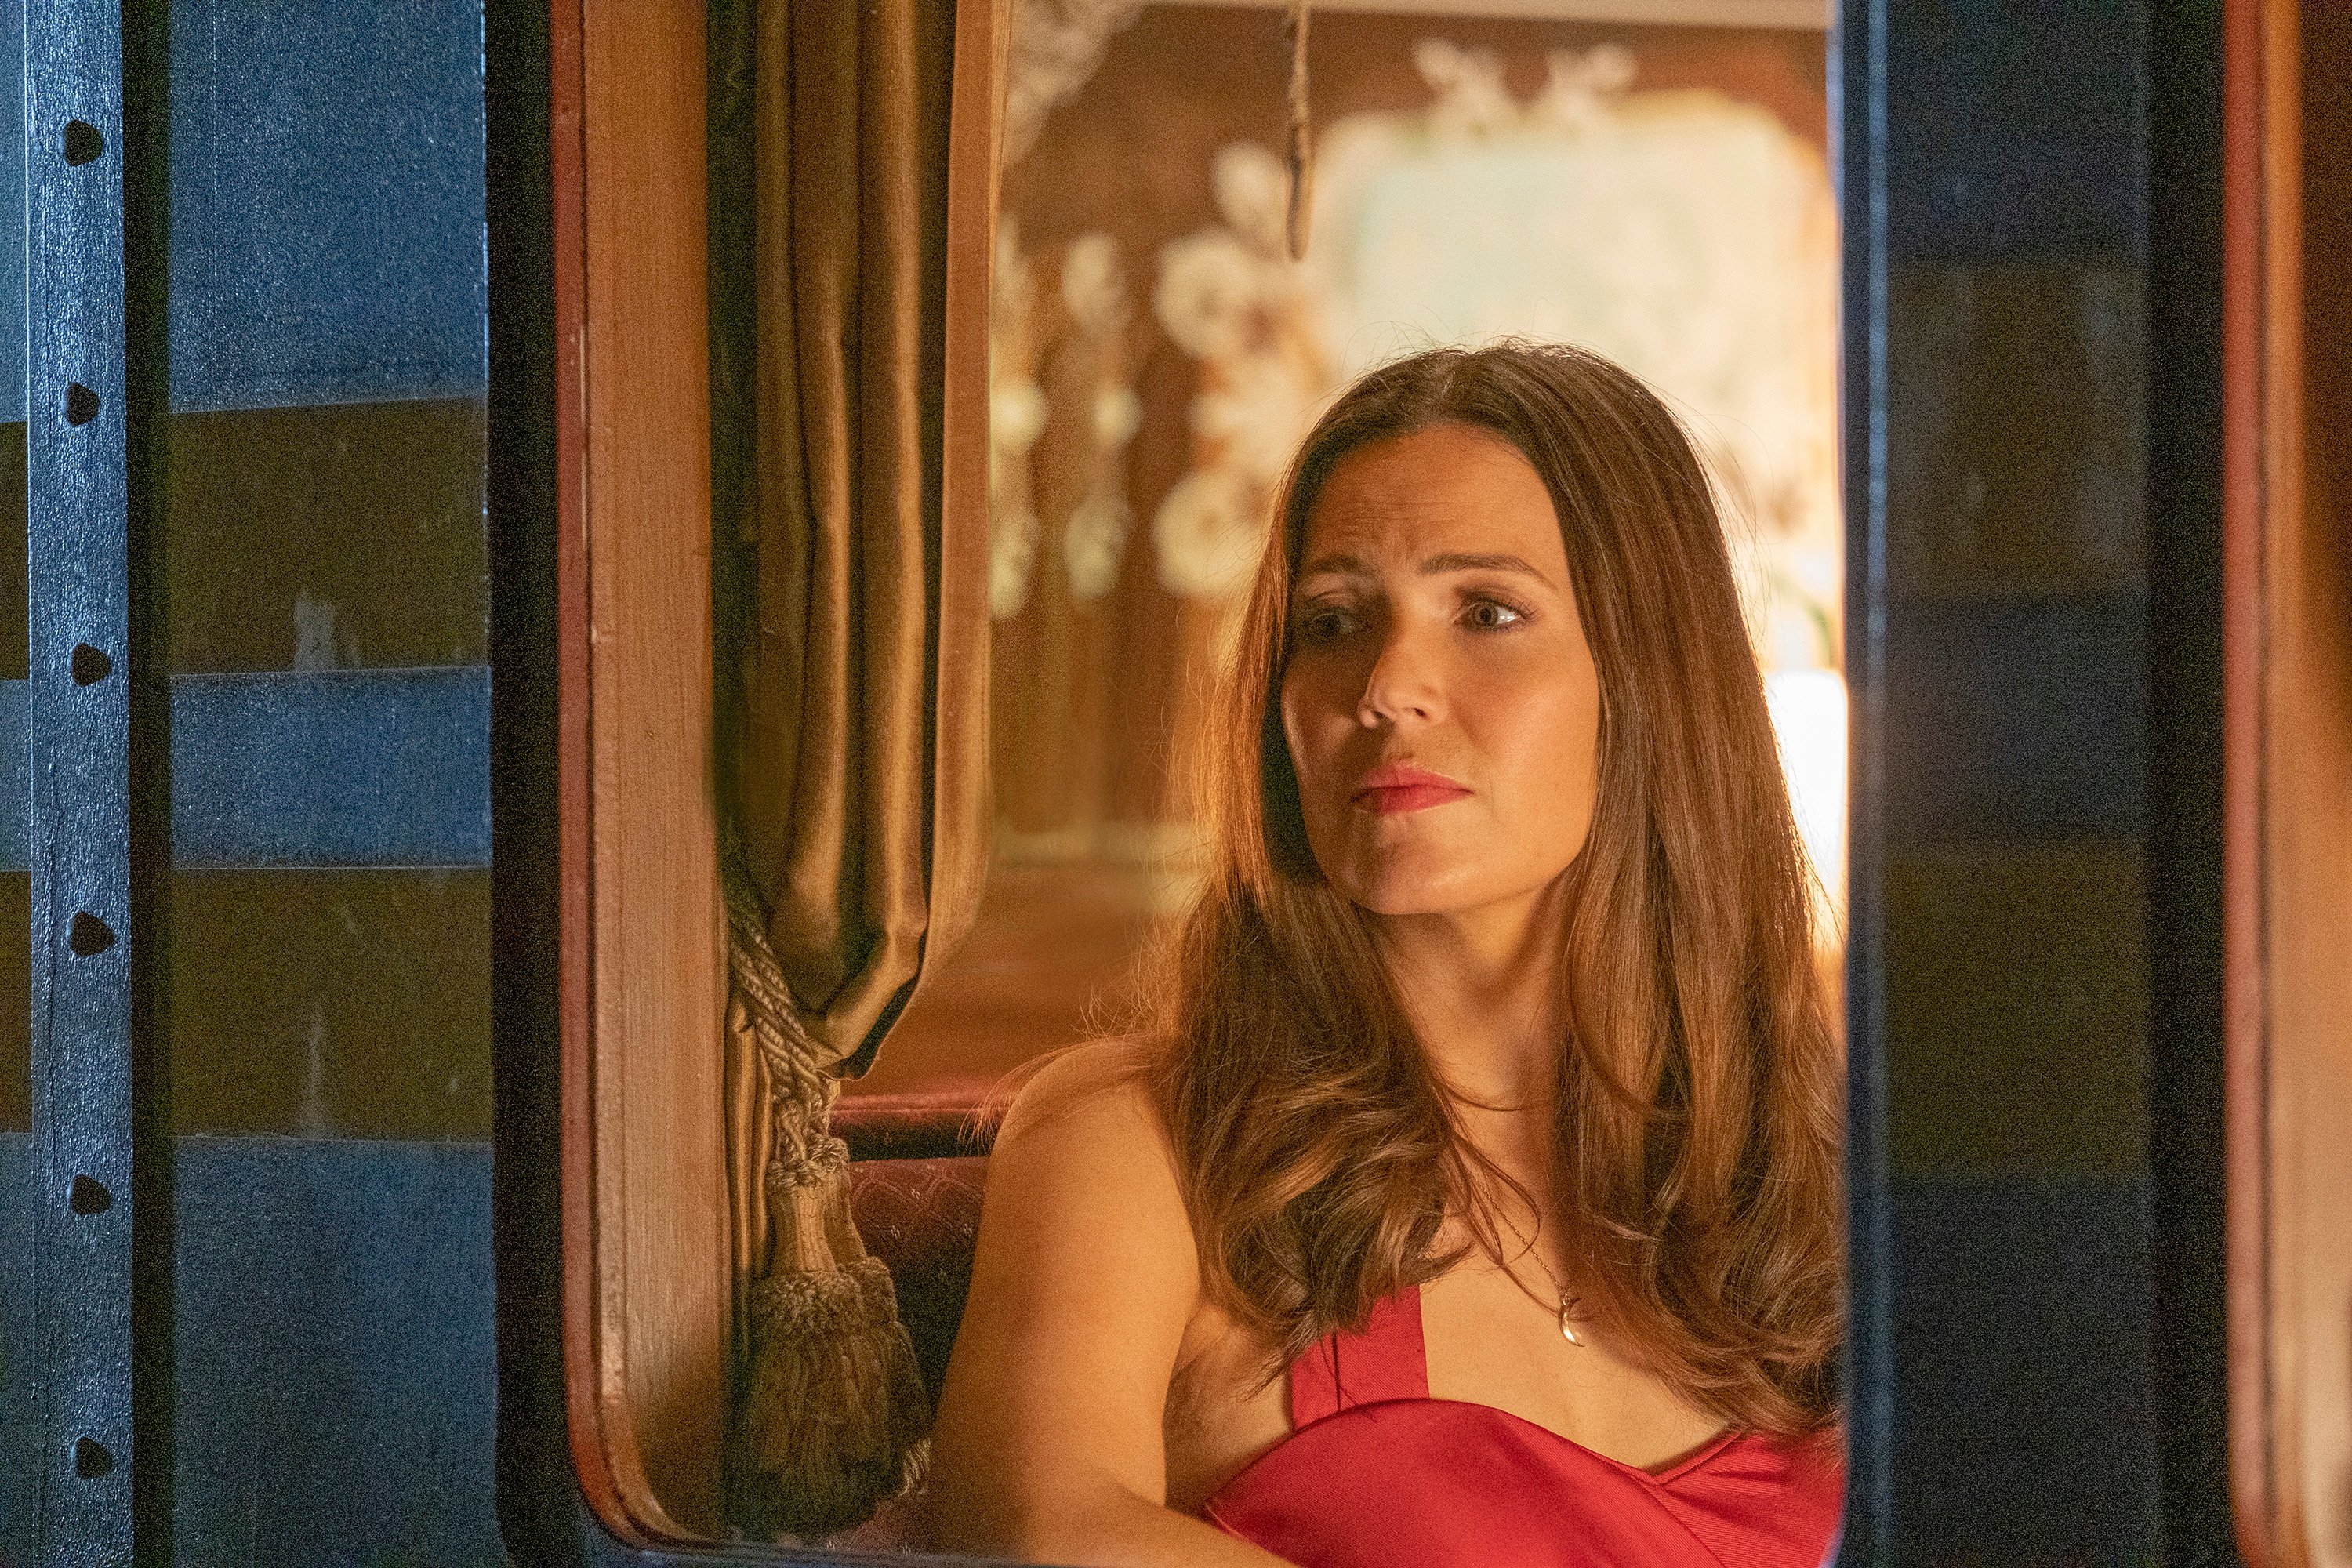 Mandy Moore, in character as Rebecca Peason in 'This Is Us' Season 6, wears a red dress.